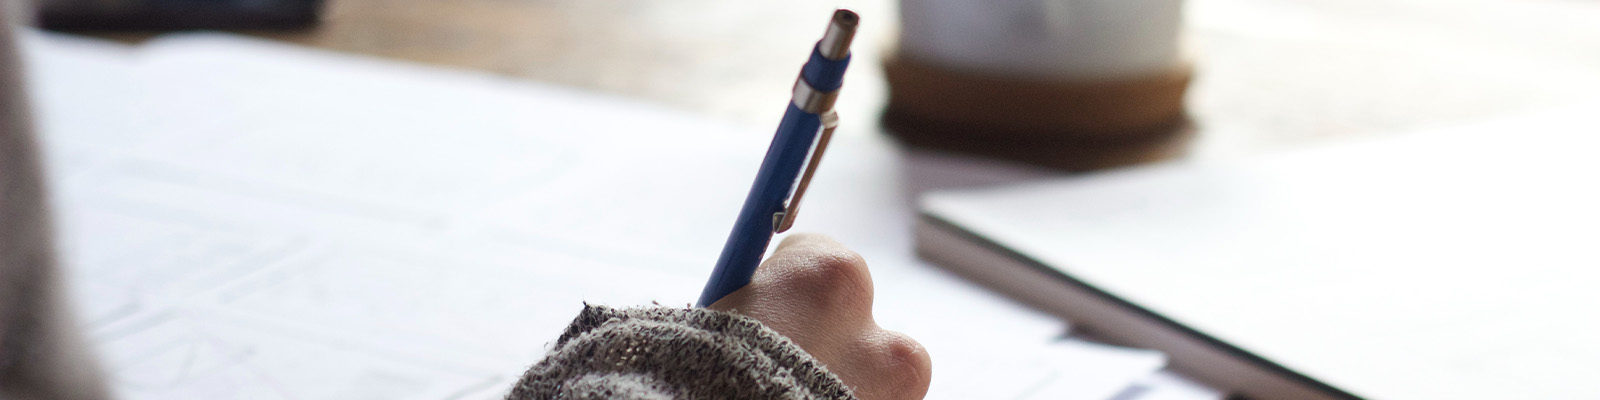 Student studying holding a mechanical pencil